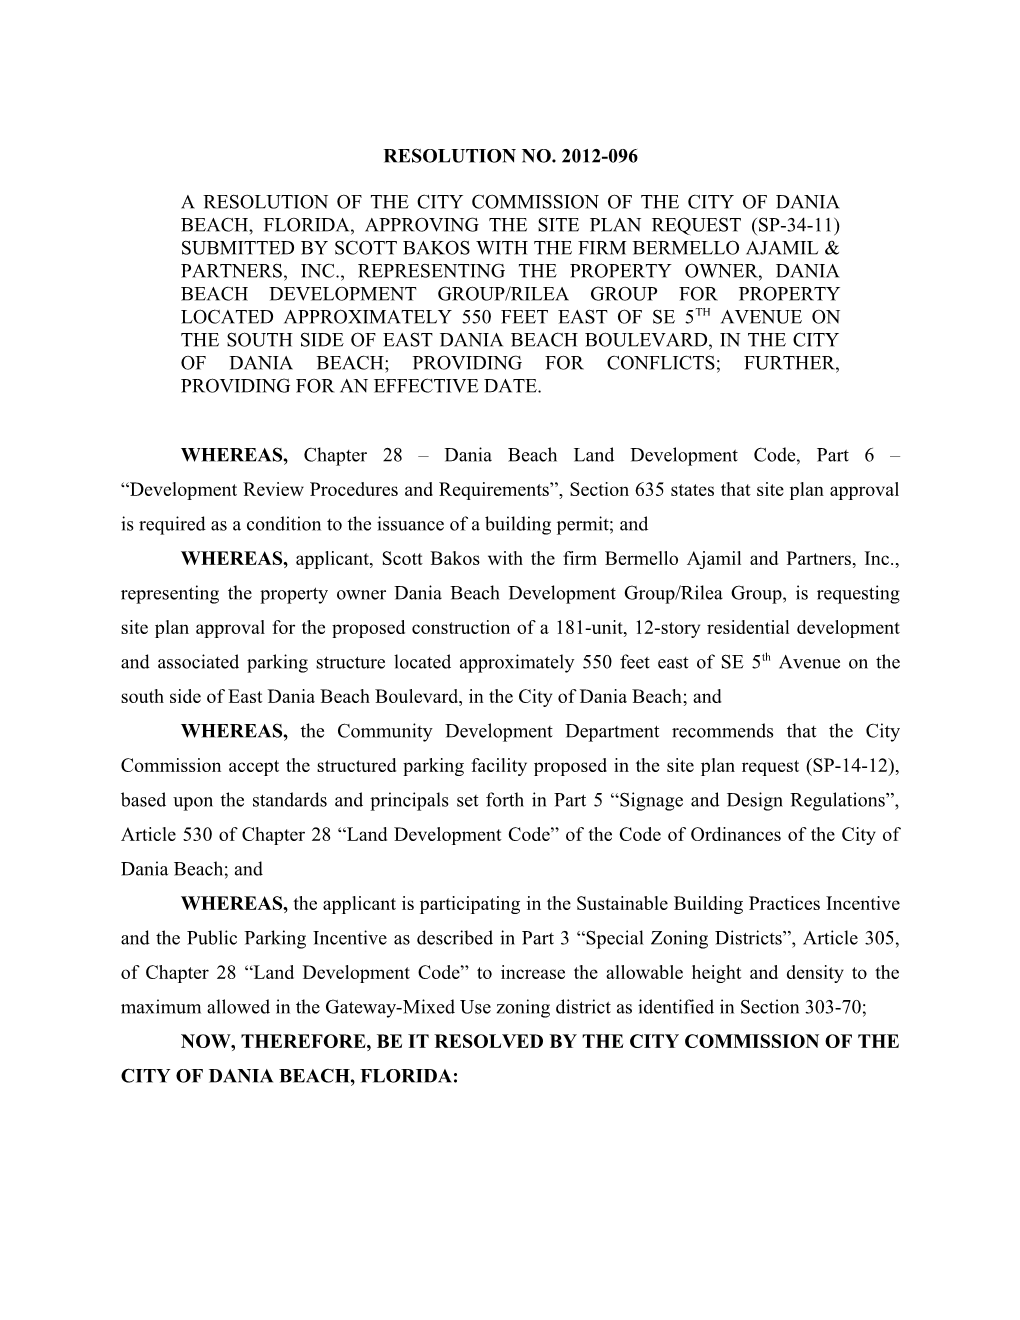 Now, Therefore, Be It Resolved by the City Commission of the City of Dania Beach, Florida s1